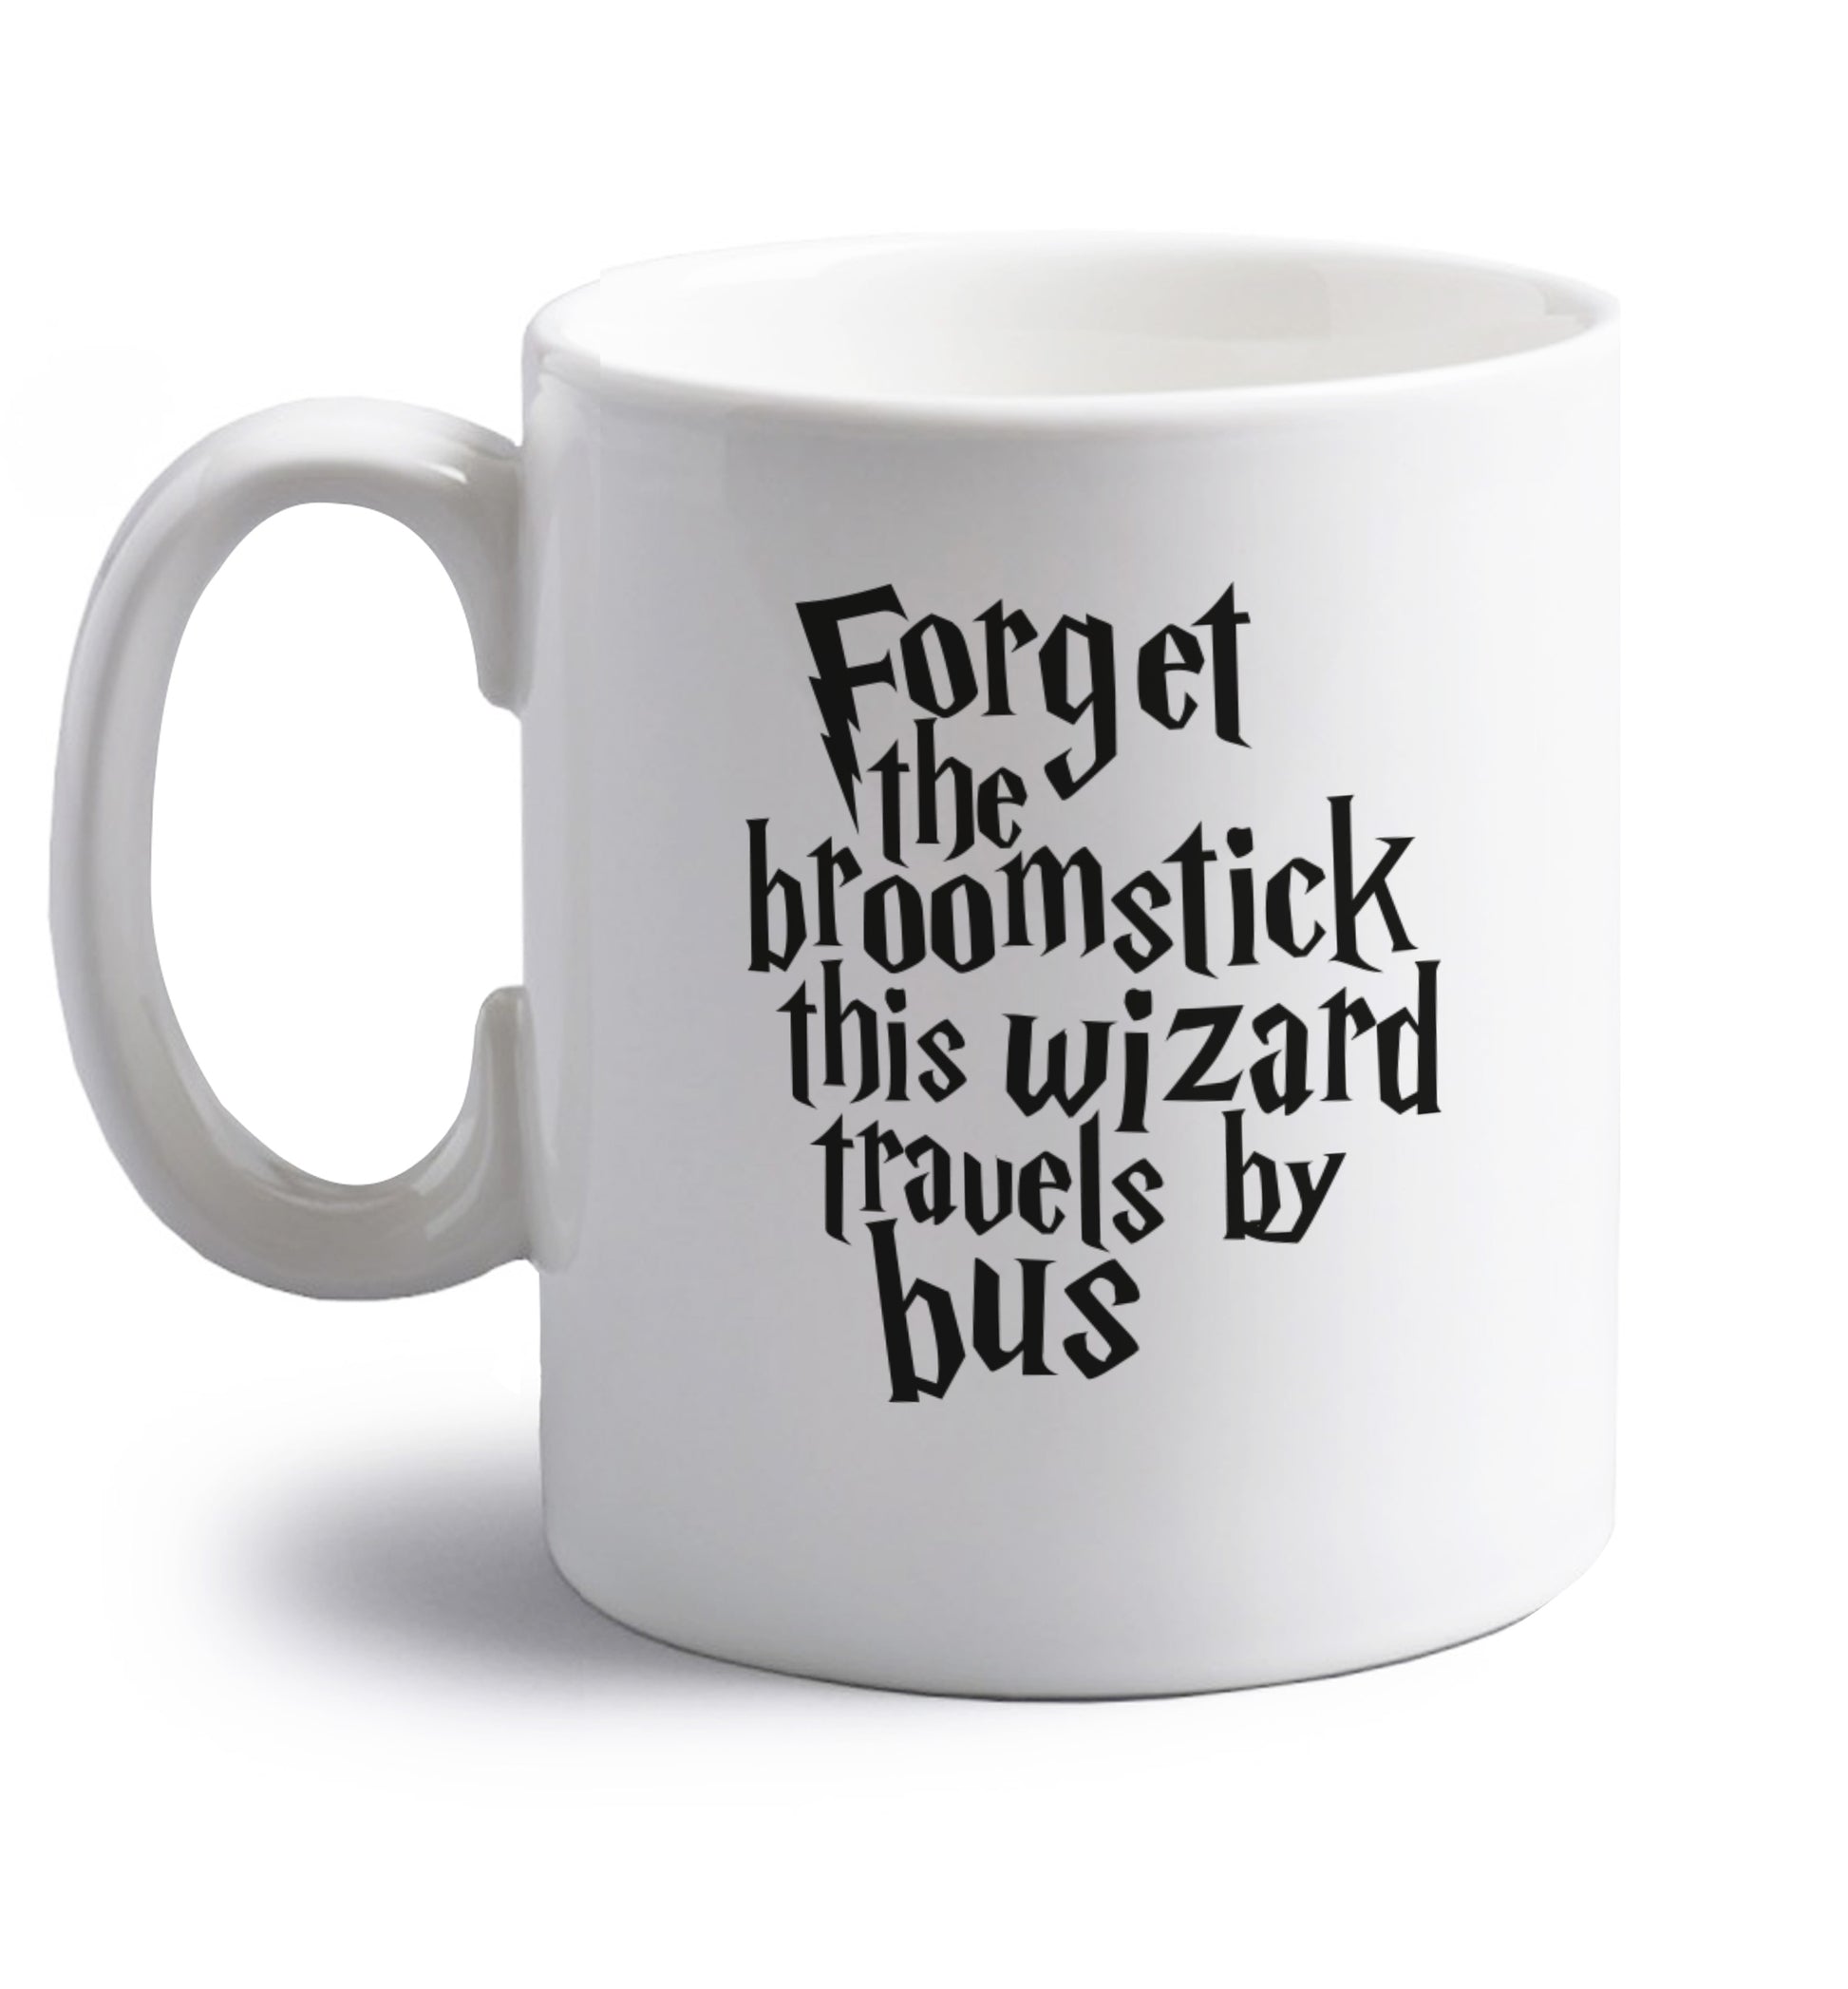 Forget the broomstick this wizard travels by bus right handed white ceramic mug 